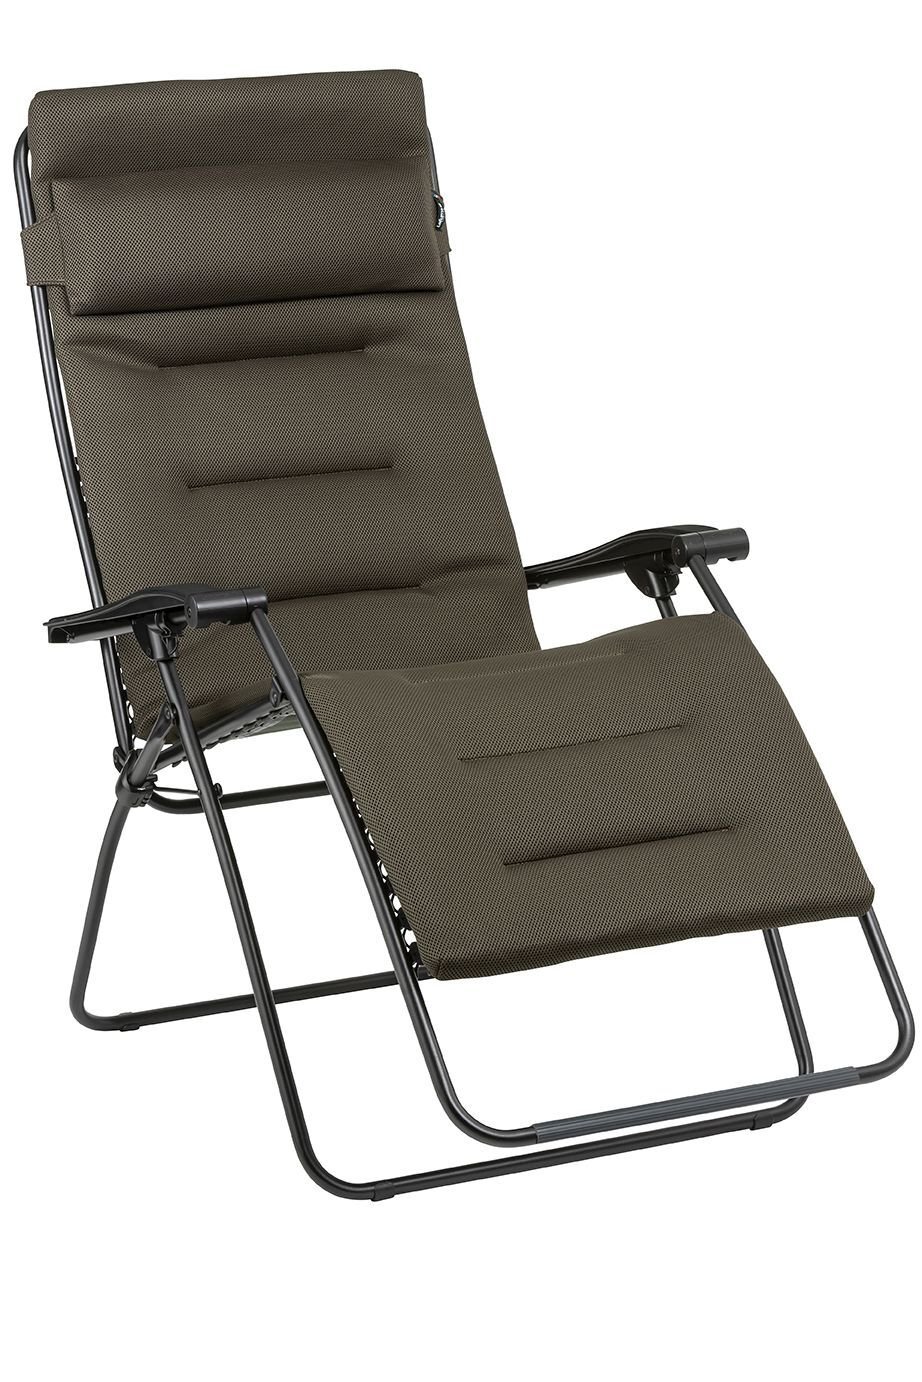 Lafuma Relax Rsx Clip Xl , Air Comfort Taupe Air Comfort Taupe / Stahl Schwarz